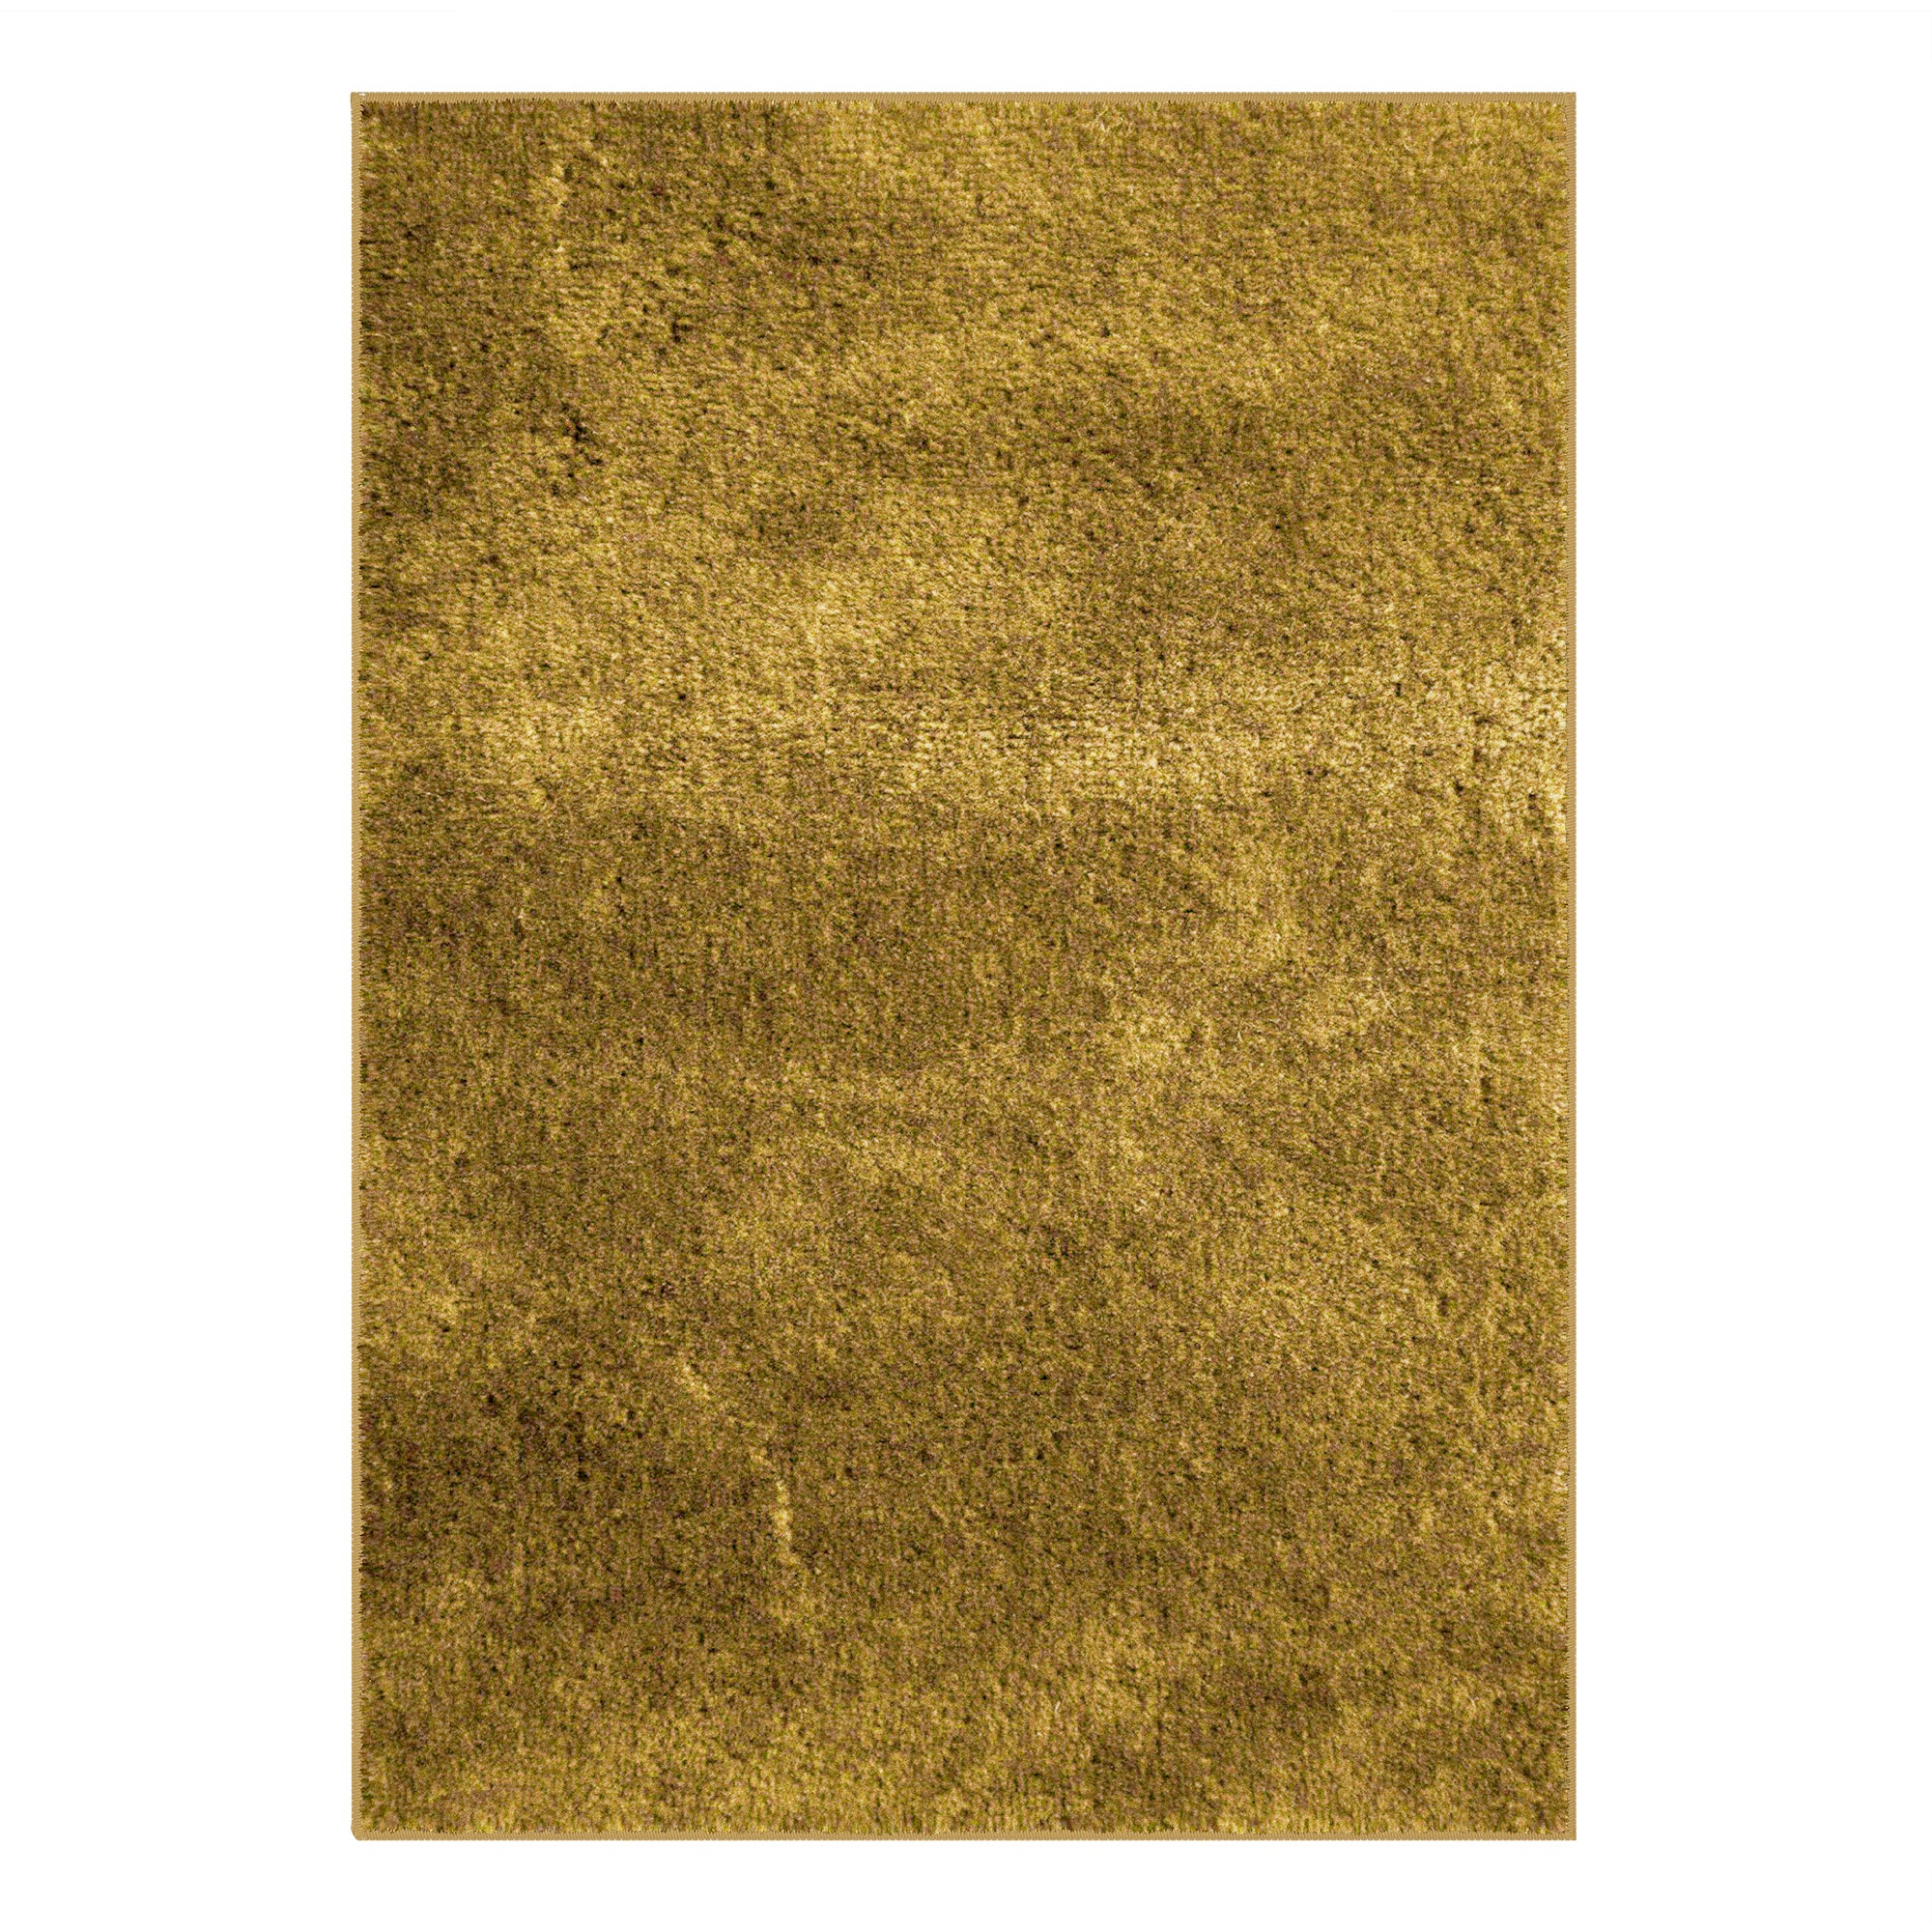 Solid Pattern Yellowish Brown Carpet for Living Room & Bedroom